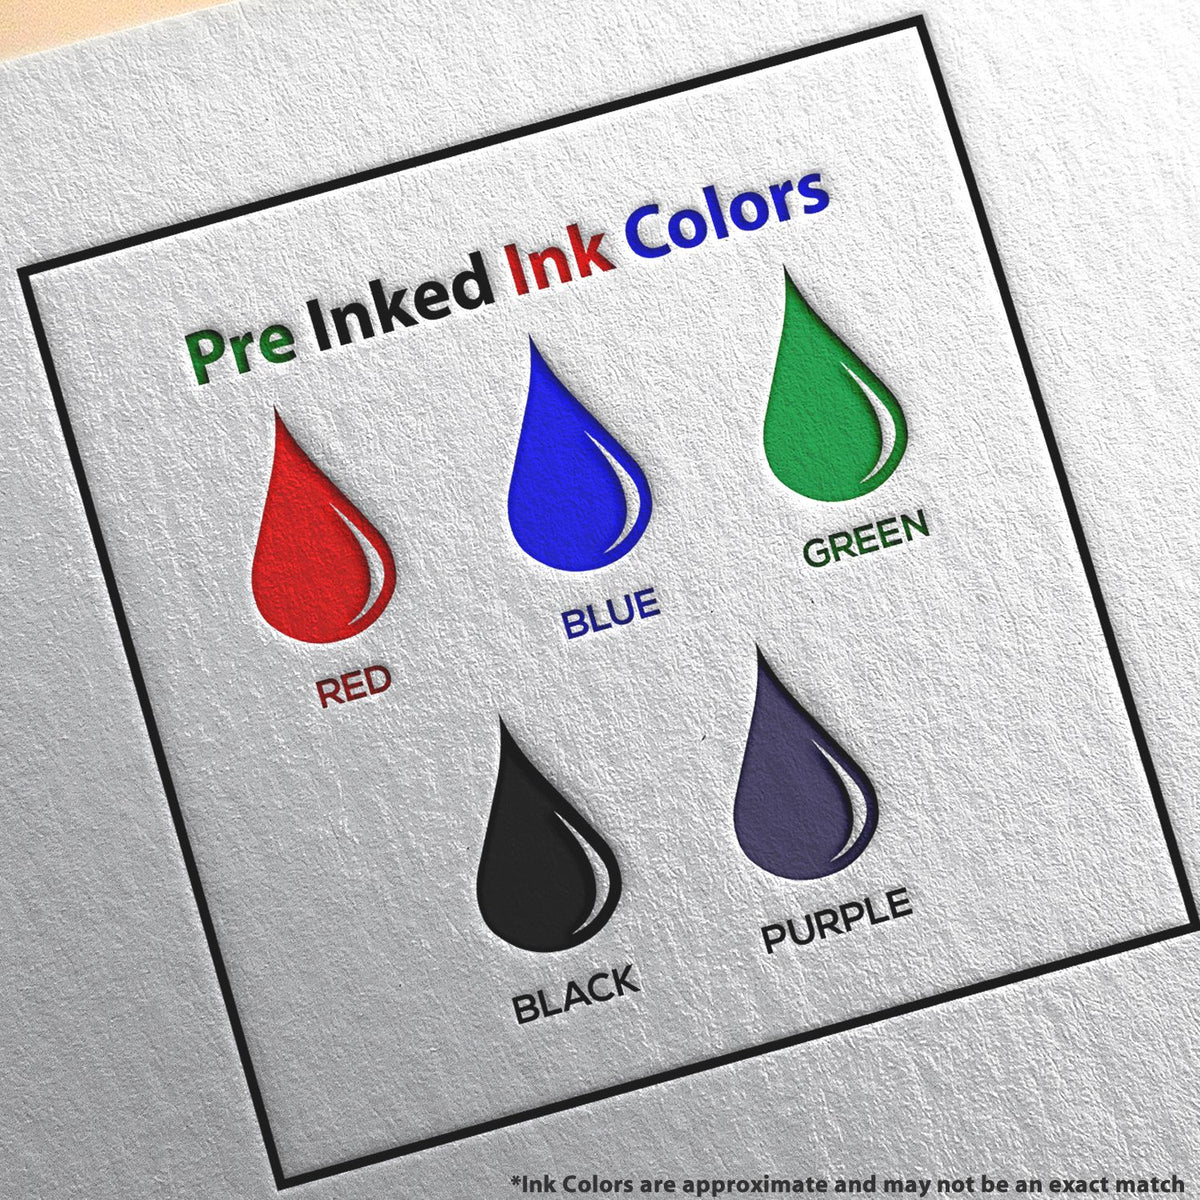 A picture showing the different ink colors or hues available for the Slim Pre-Inked Arizona Land Surveyor Seal Stamp product.